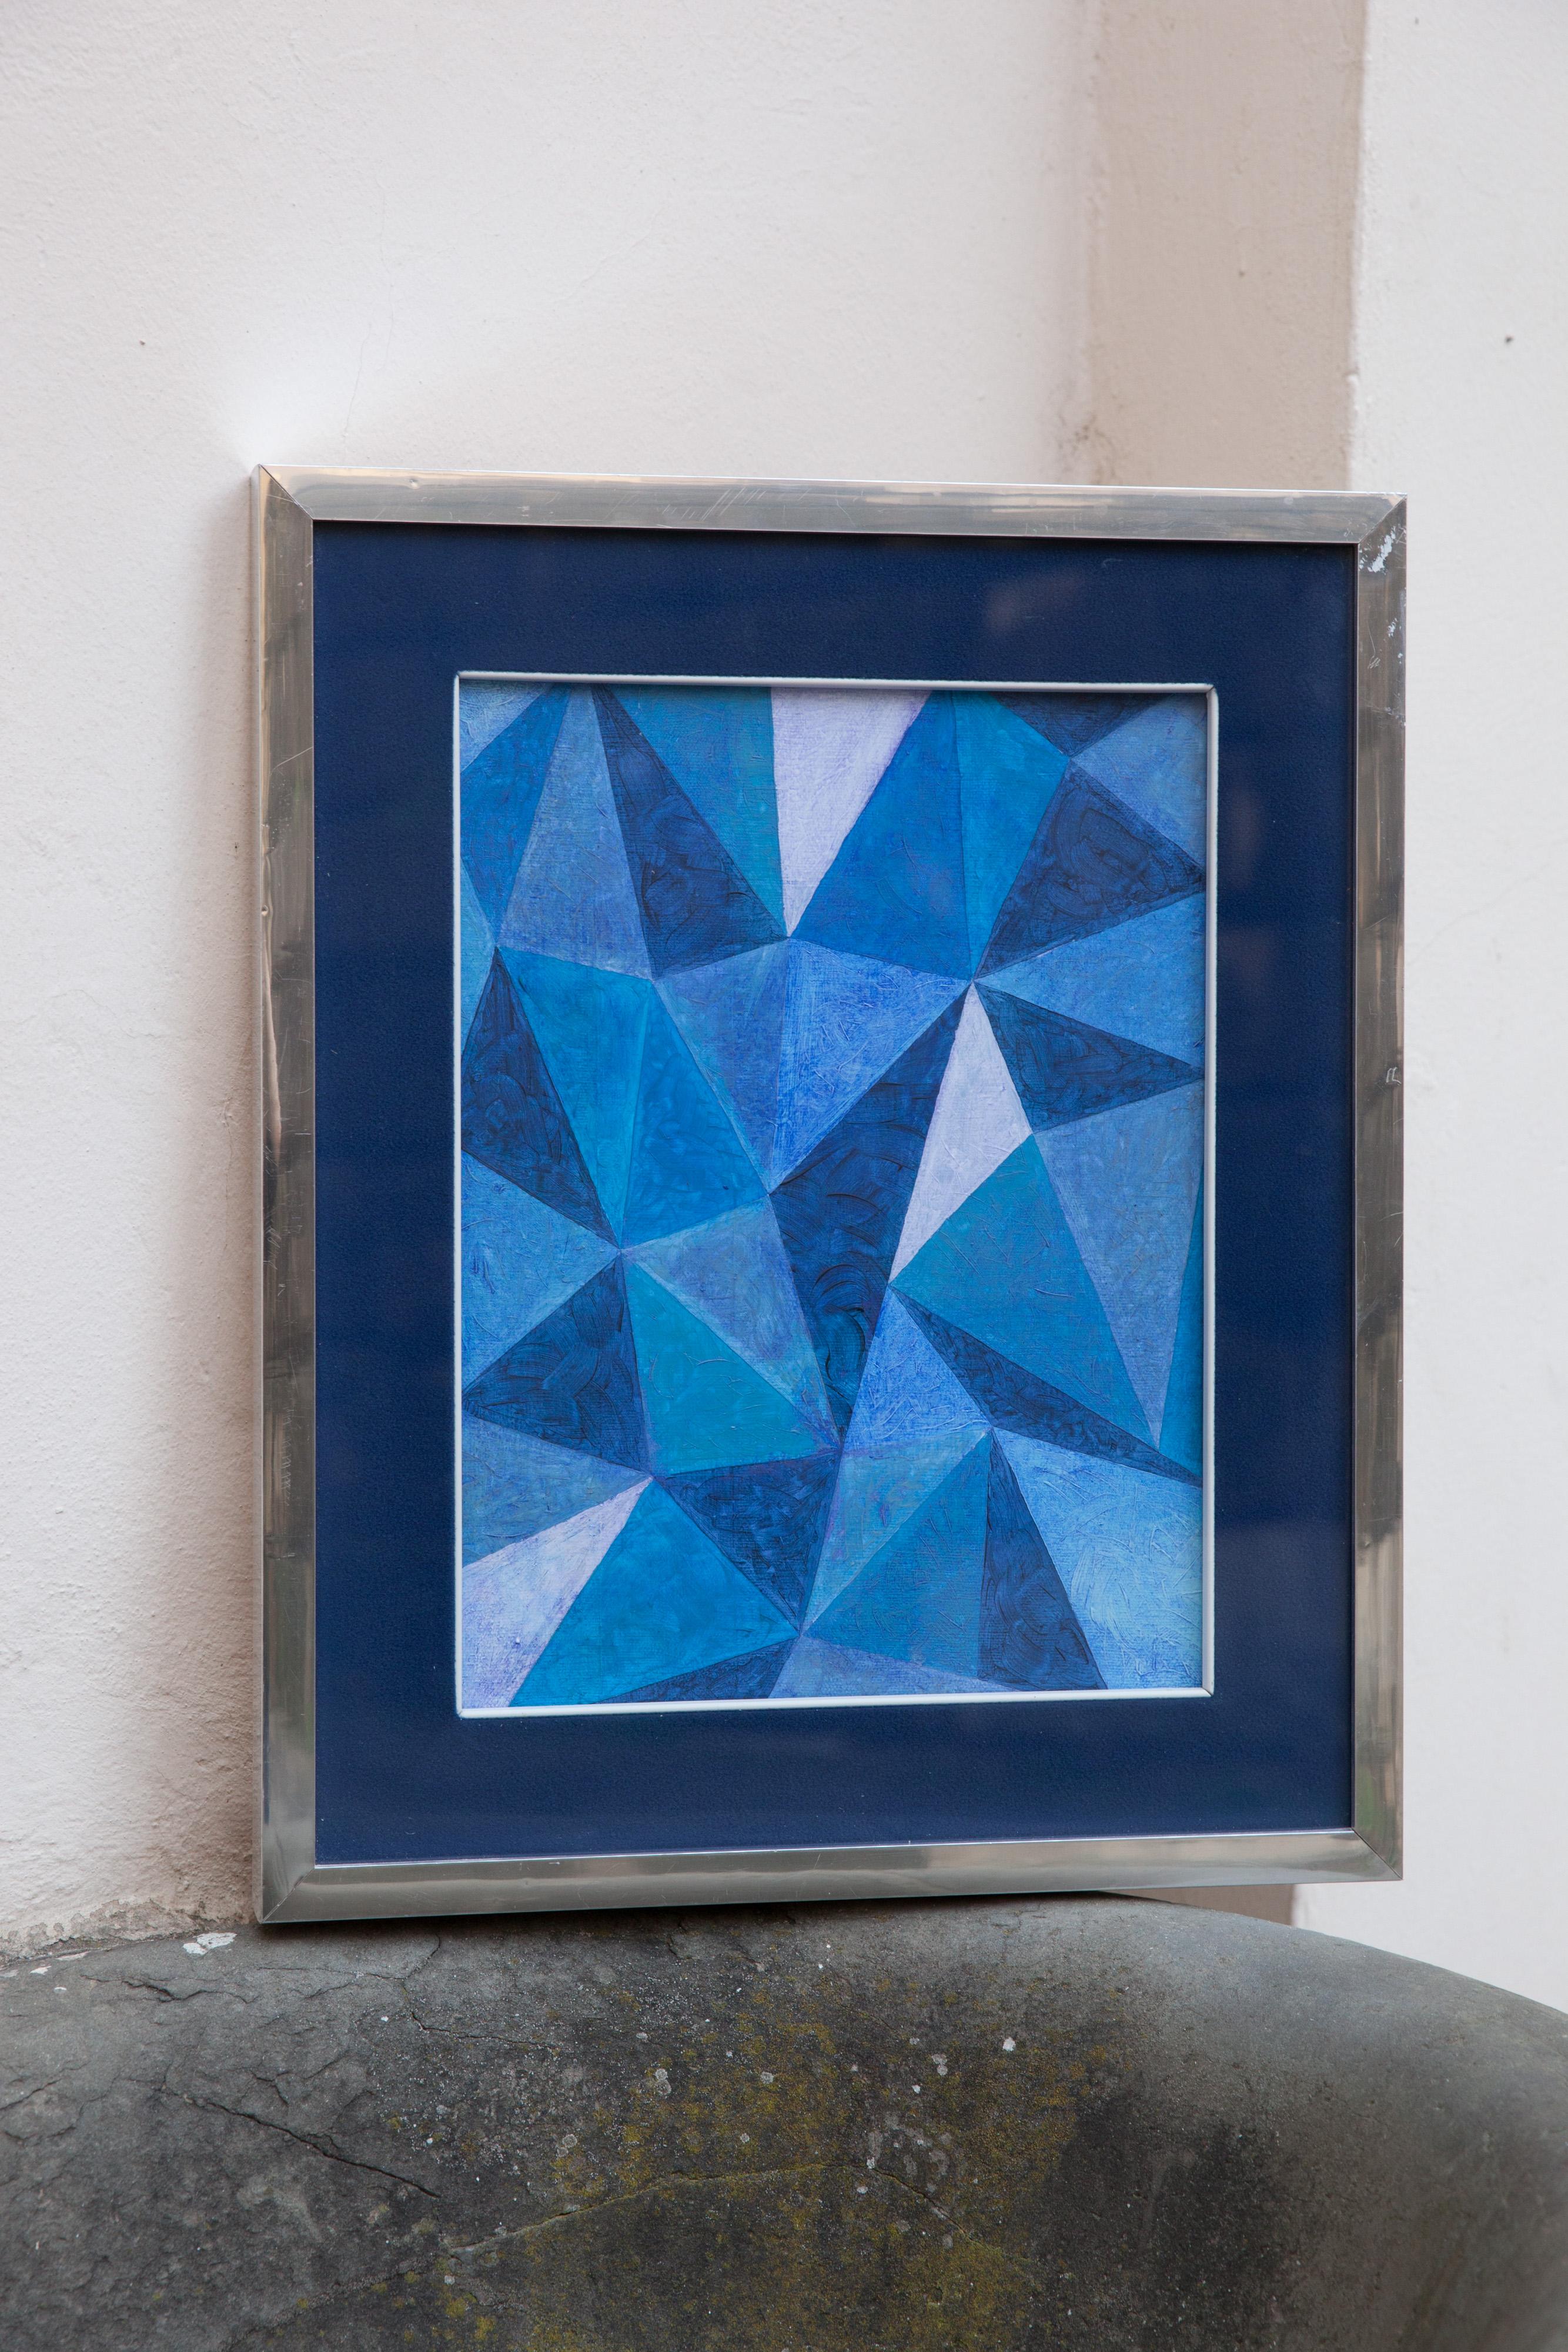 Abstract painting with geometric play of blue triangles. Circa 1970 - Abstract Geometric Painting by Unknown